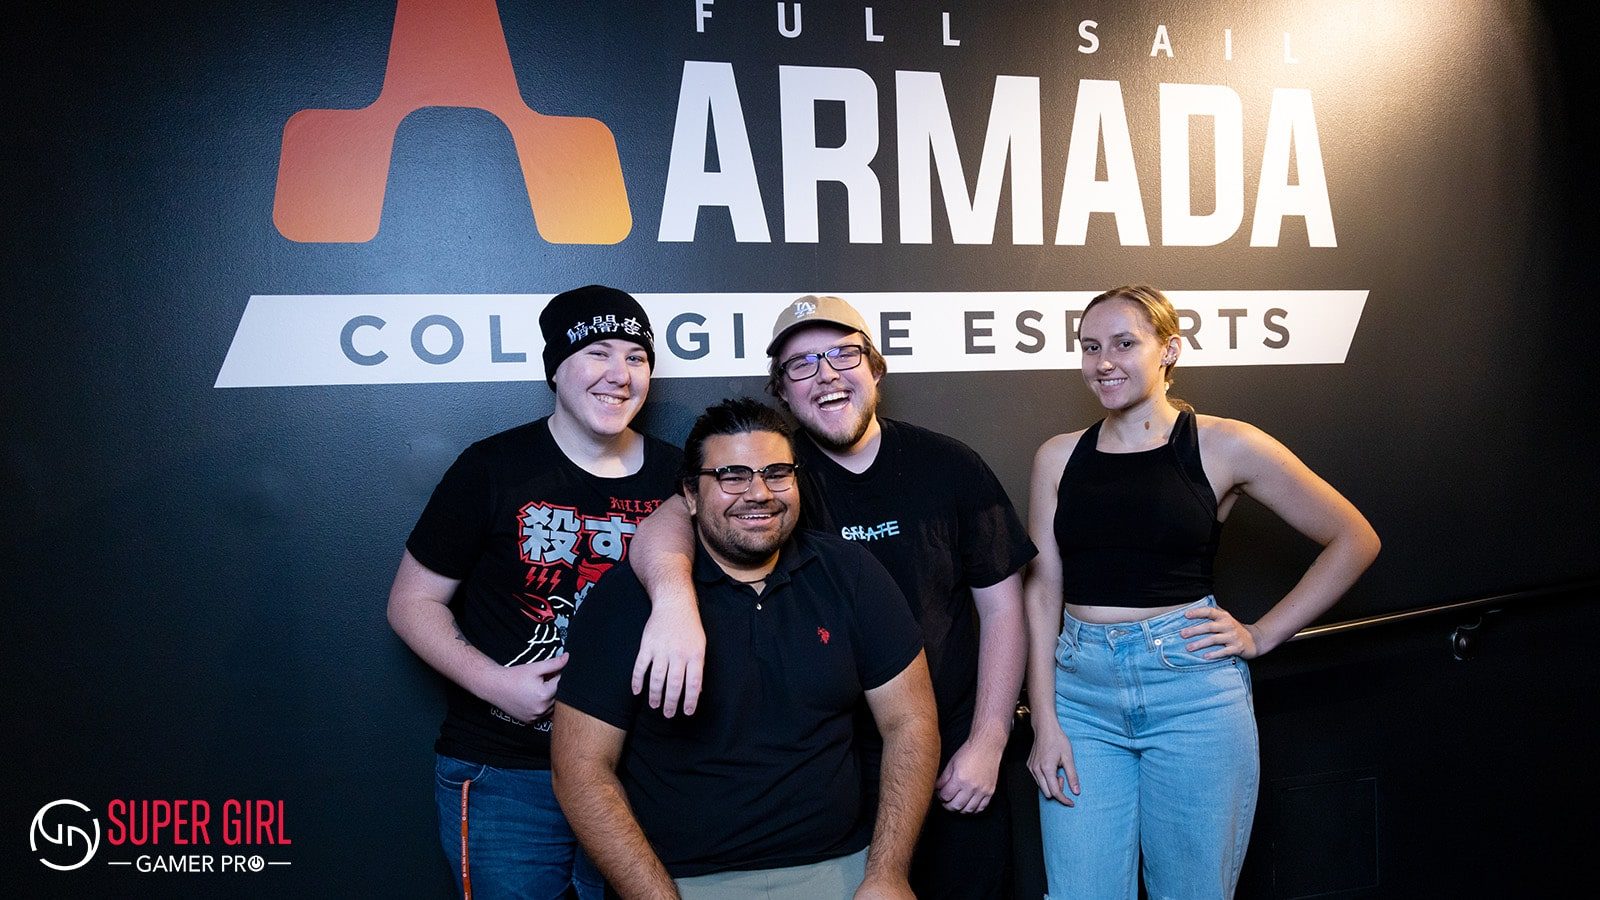 Full Sail students smiling while standing in front of the Full Sail Armada logo on campus, "Super Gamer Girl Pro" and logo appears in the bottom left corner.